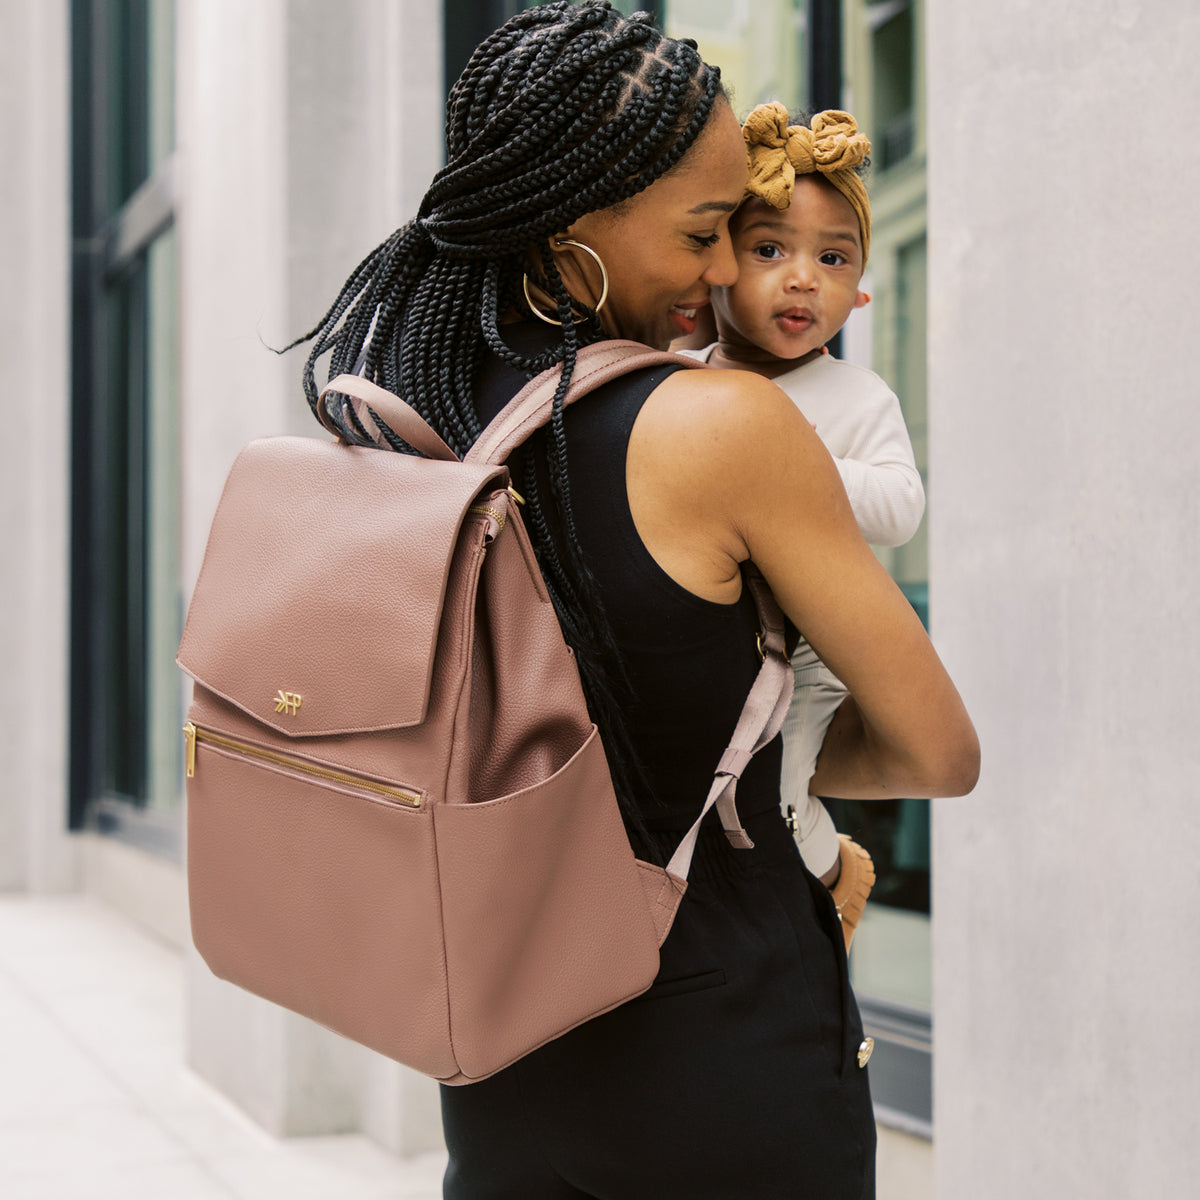 The Best Mini Diaper Bags for Busy Parents – Petunia Pickle Bottom